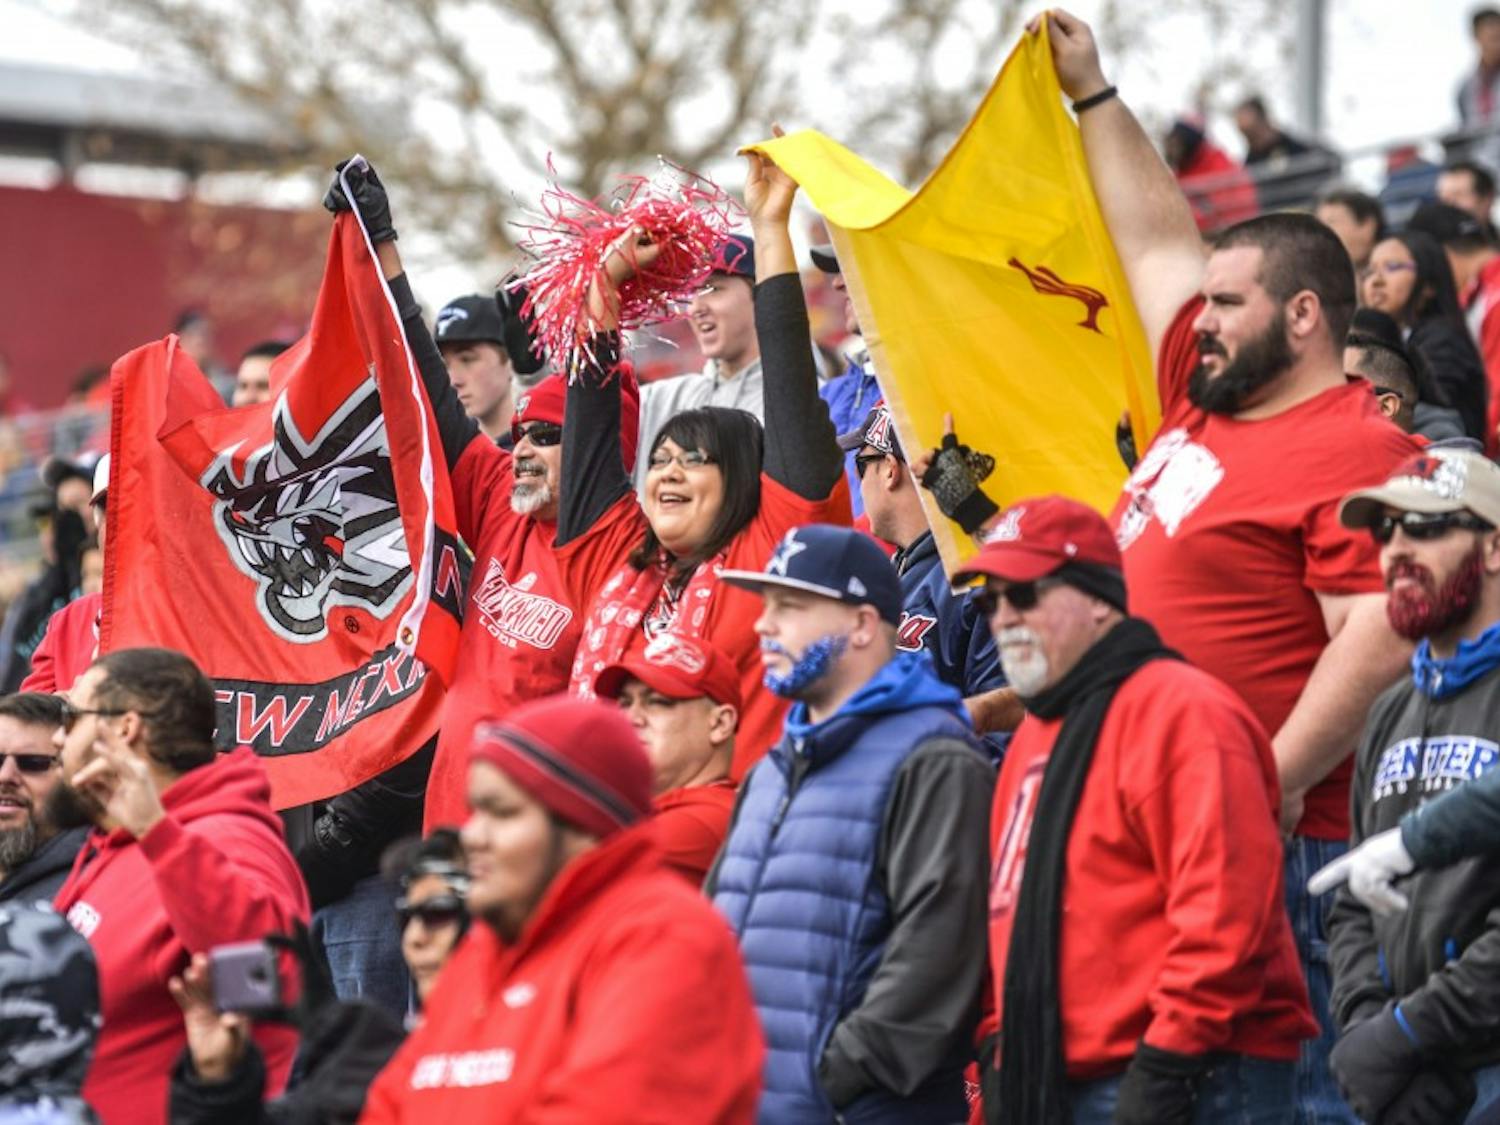 Football fans cheer during the 10th Gildan New Mexico Bowl Saturday December 19, 2015 at University Stadium. During the upcoming season, Lobo football fans will have the opportunity to win prizes during giveaways, as well as be able to come down to the field after games for photos.